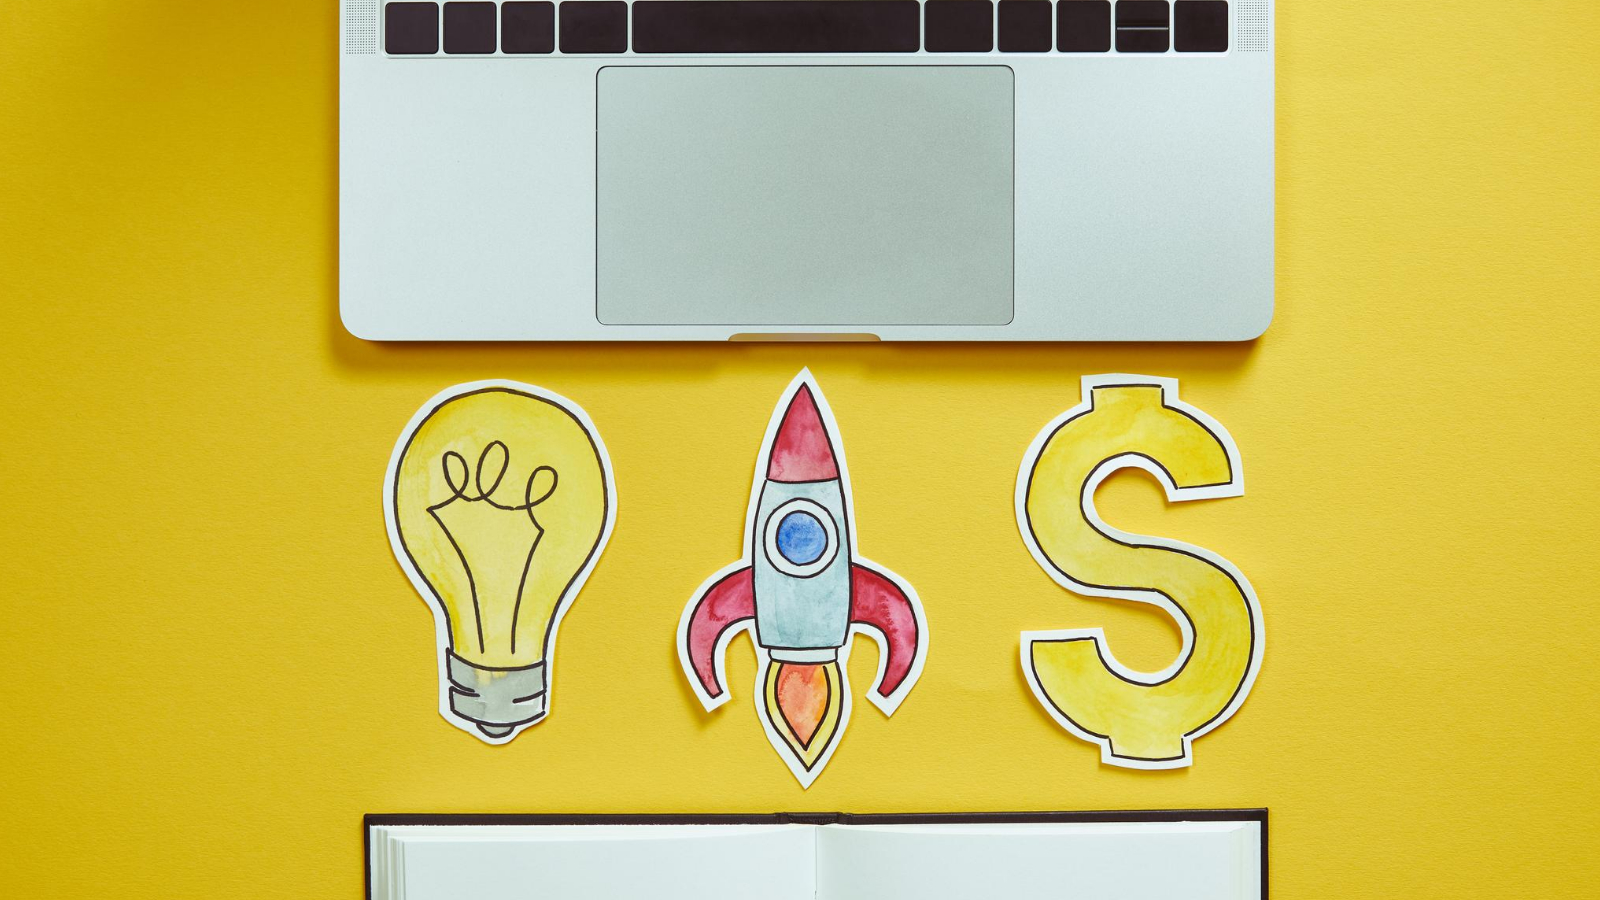 symbol of a rocket dollar bulb in front of a sleek laptop, representing the potential for financial success and growth using targeted keywords